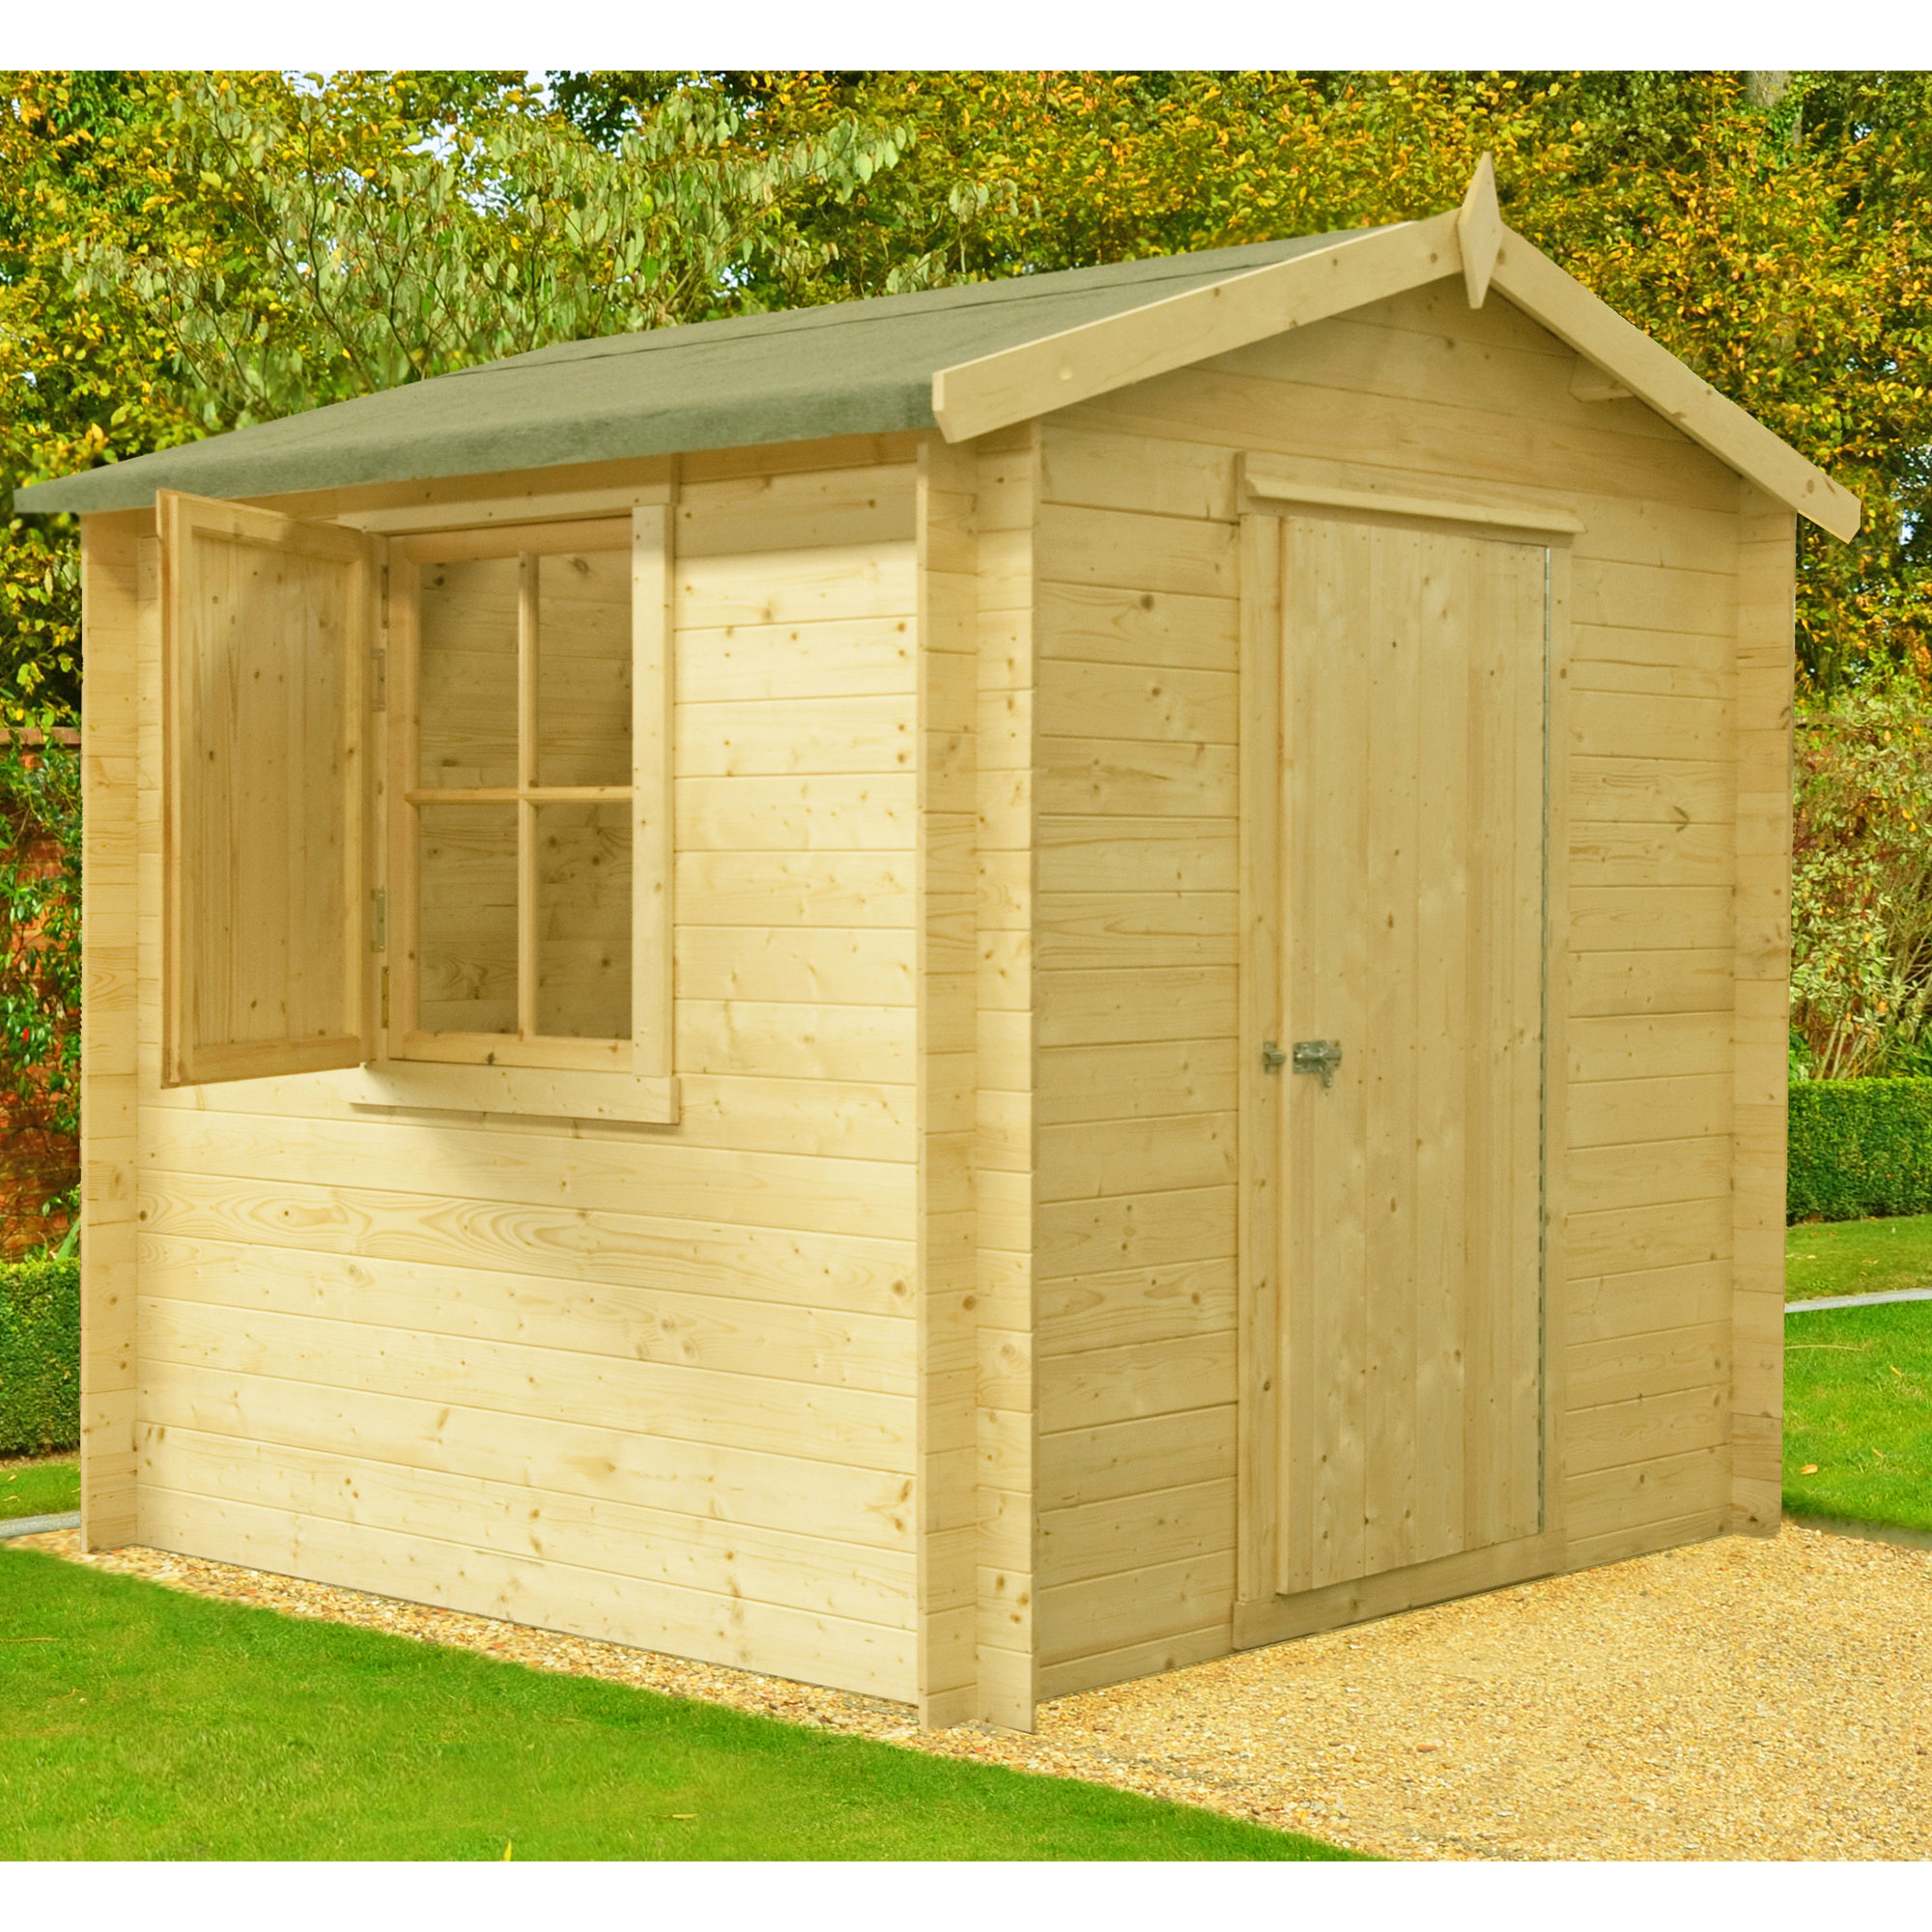 Shire Camelot 2.7m x 2.7m Log Cabin Shed (19mm) from Buy Sheds Direct